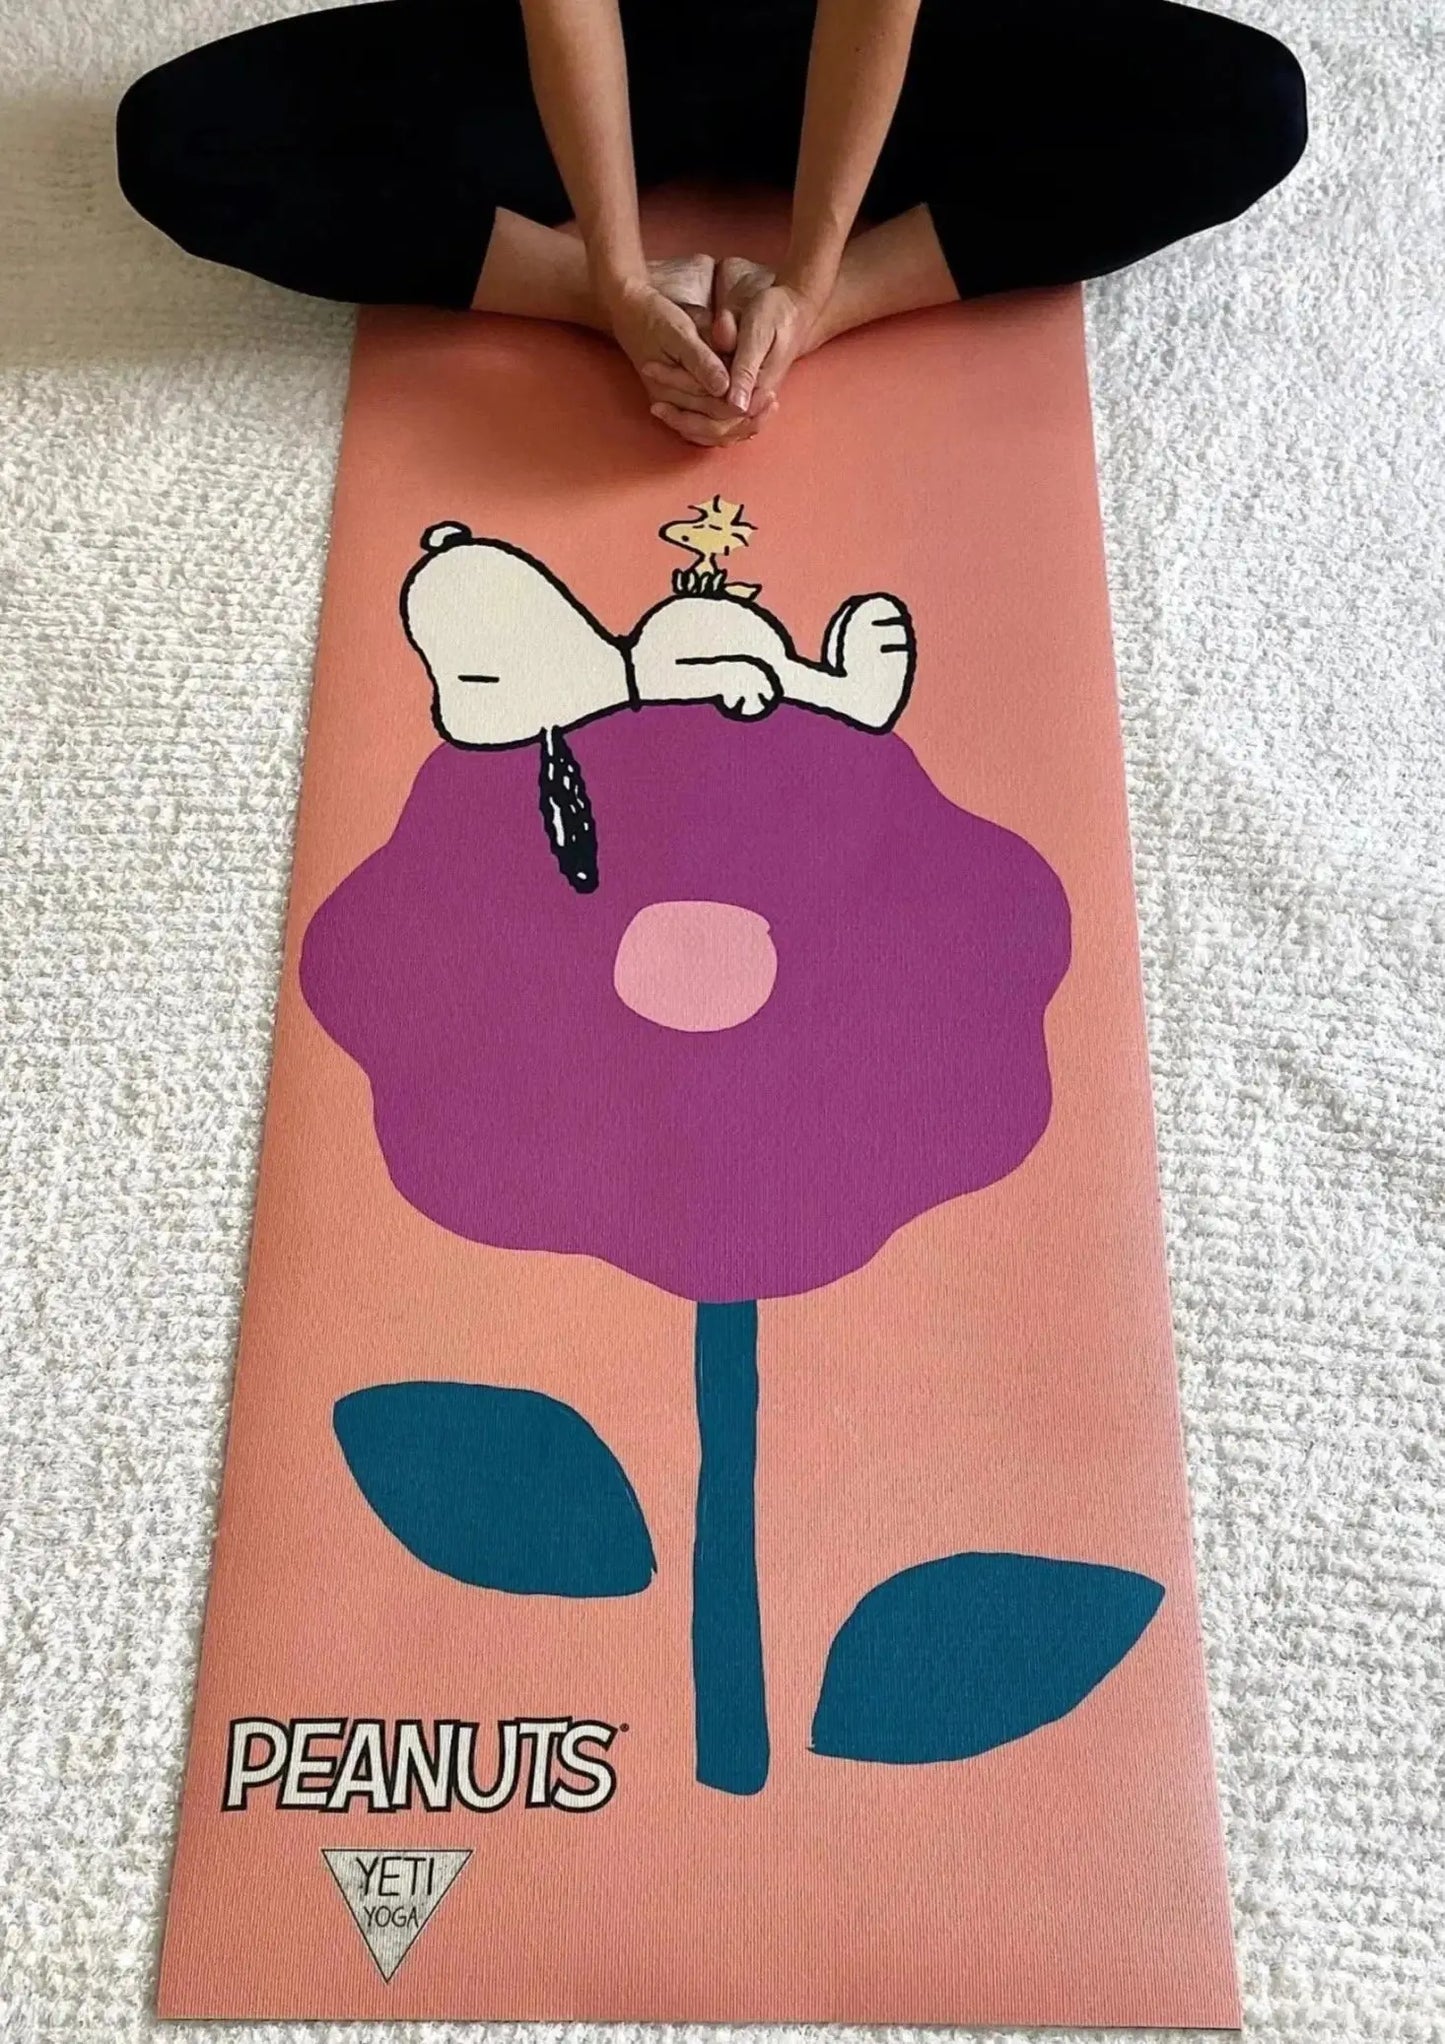 Peanuts x Yune Yoga. Snoopy Flower Yoga Mat - Snoopy and Woodstock Doing Yoga.